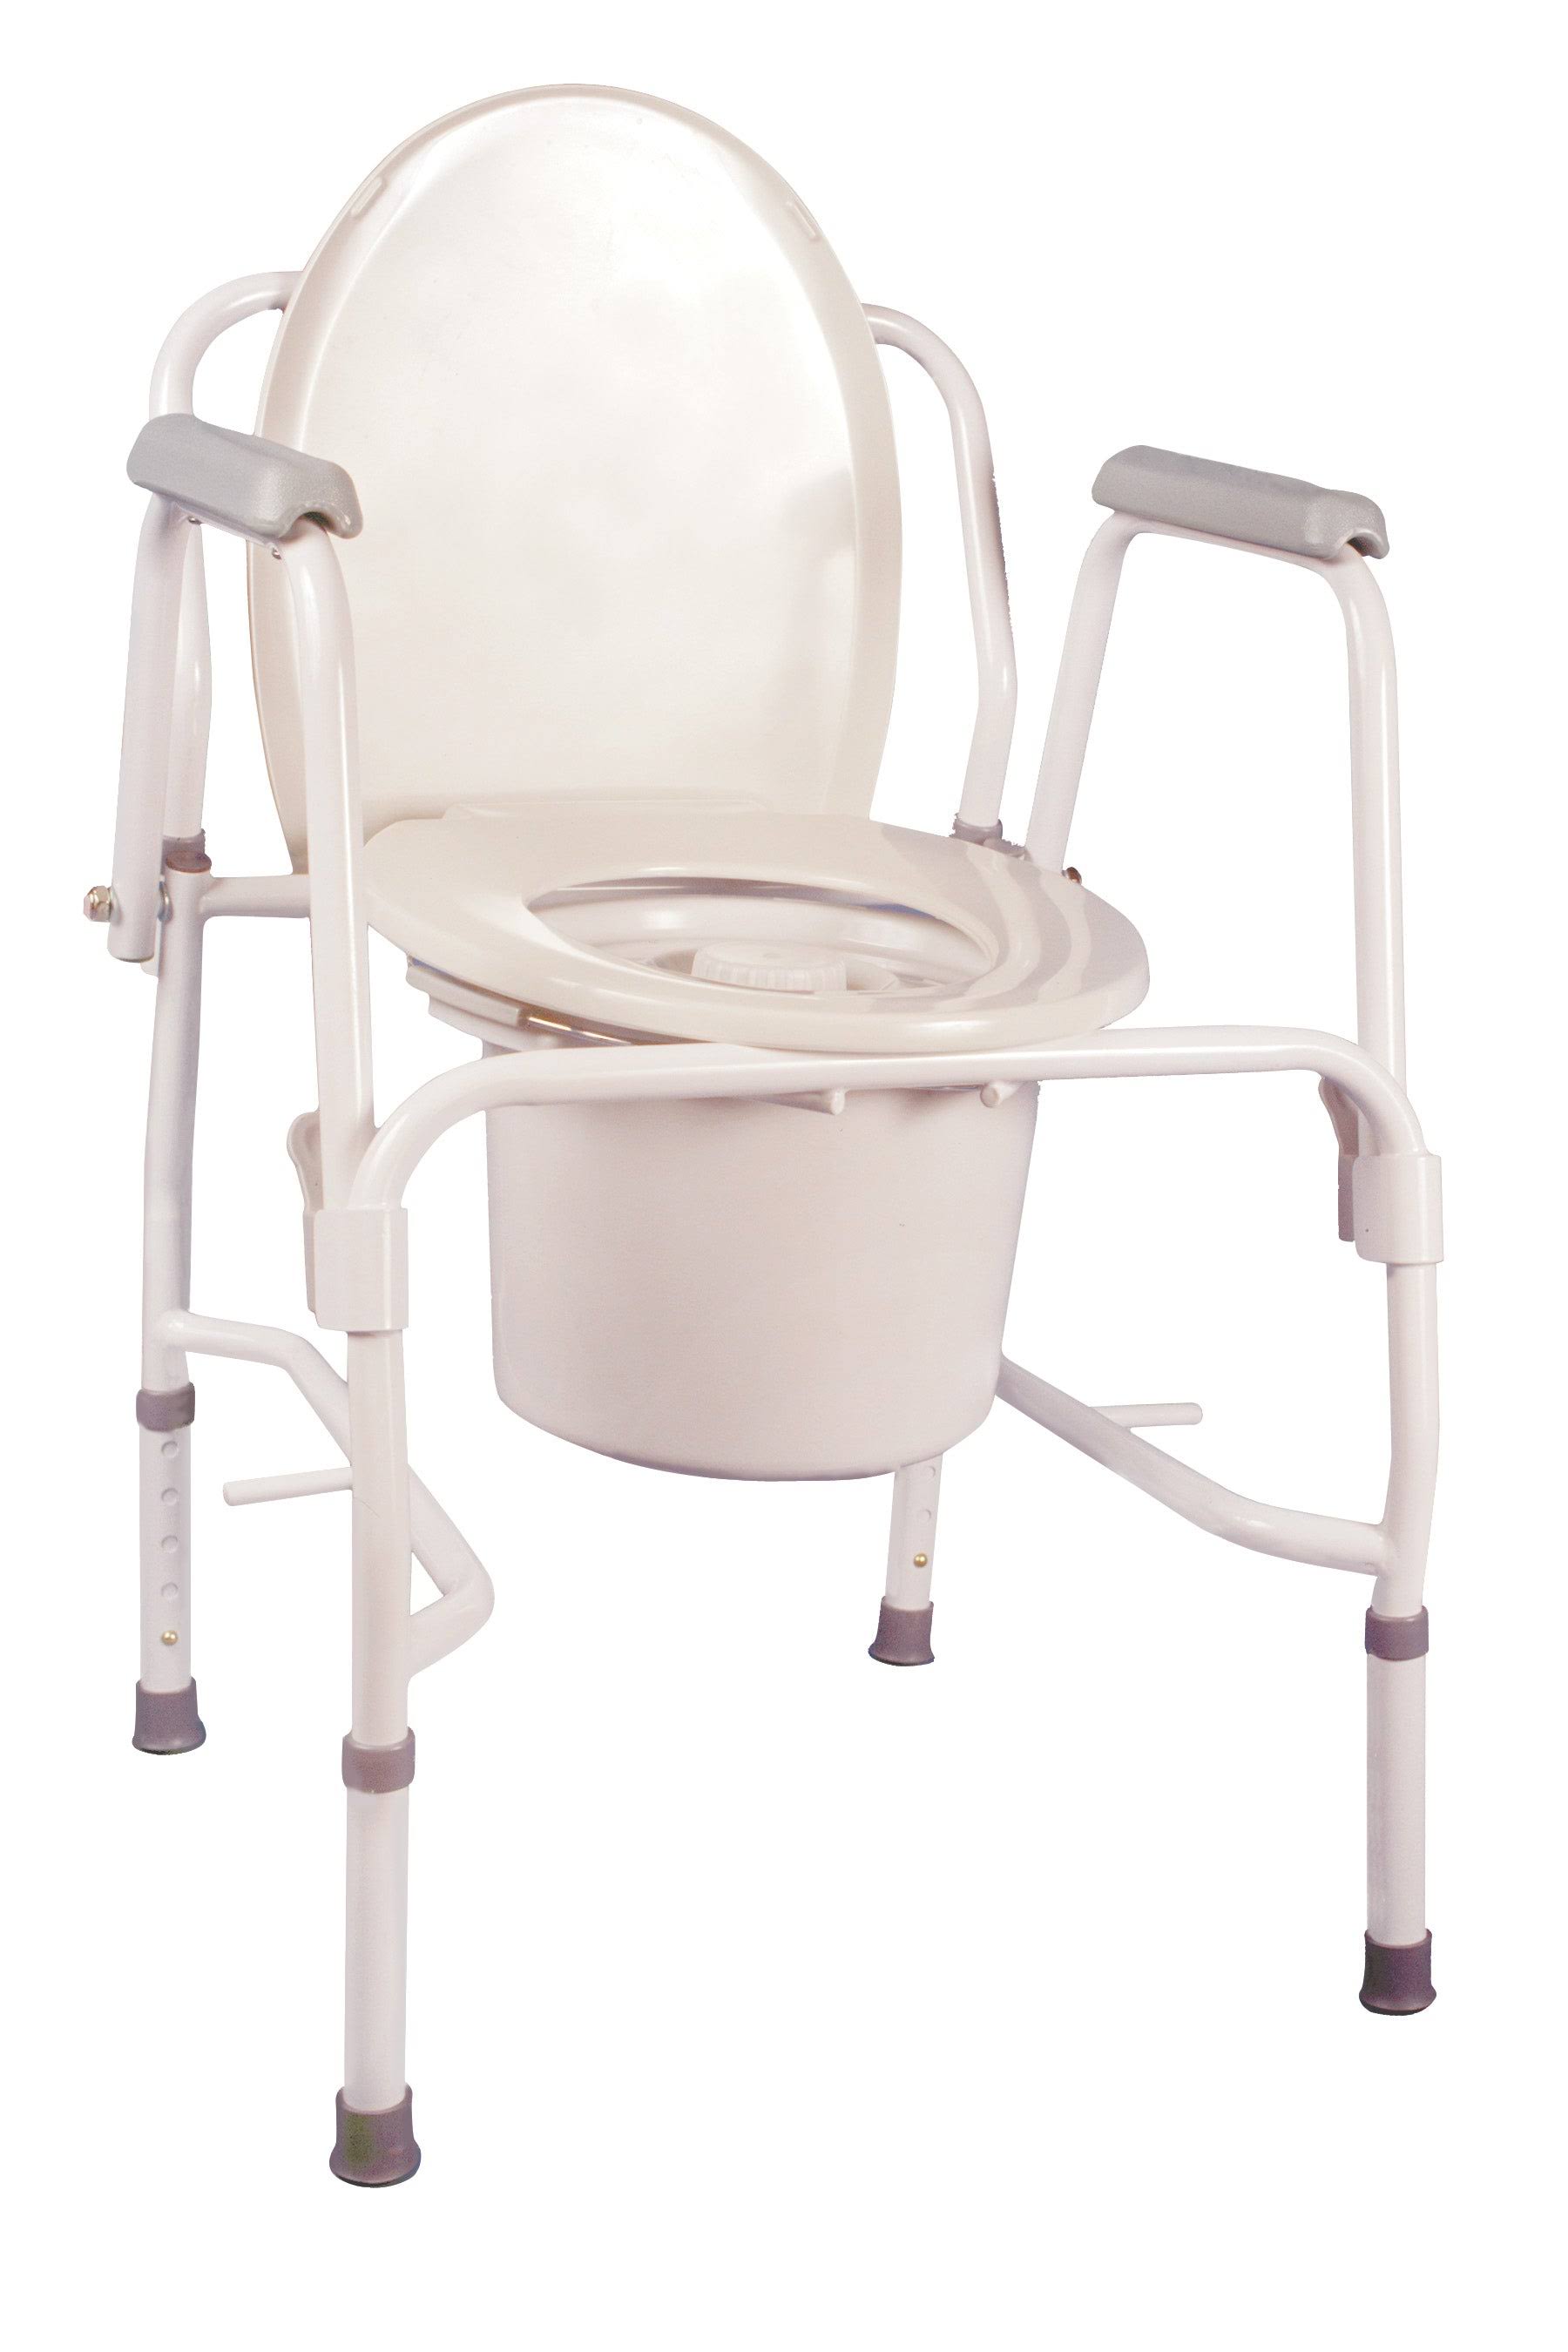 Drive Medical K. D. Deluxe Drop-Arm Commode - Steel